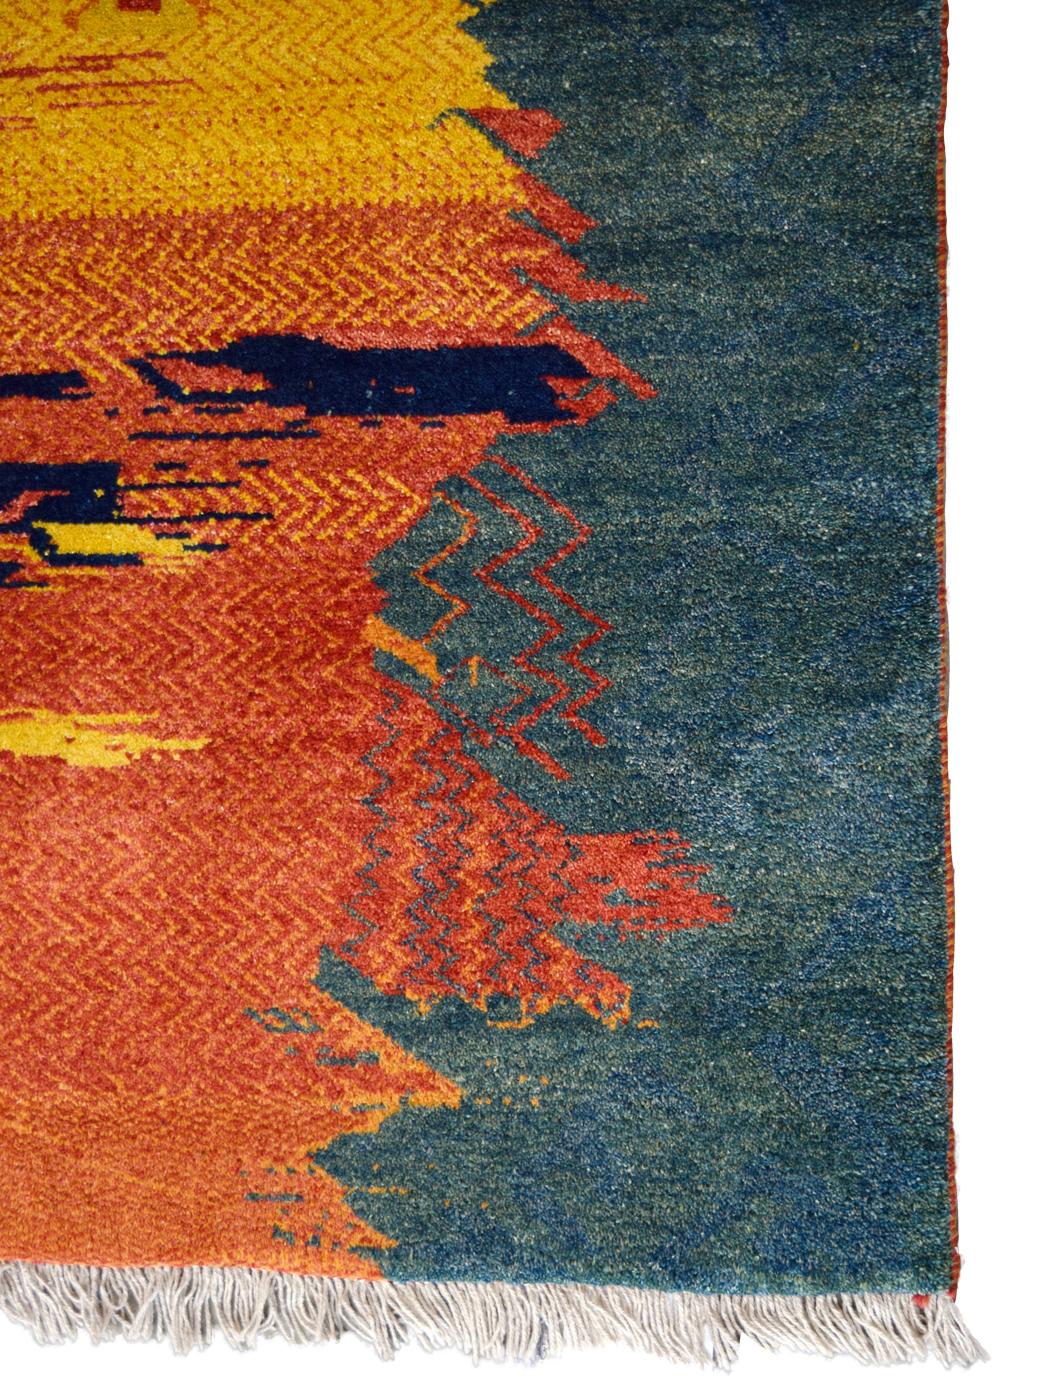 In vibrant hues of red, orange, indigo, green, and gold wool, this vintage carpet employs a unique design rarely created by traditional Gabbeh weavers. This carpet measures 4’x 5’7” and utilizes a thick plush, hand-knotted wool Lorestan weave, and a